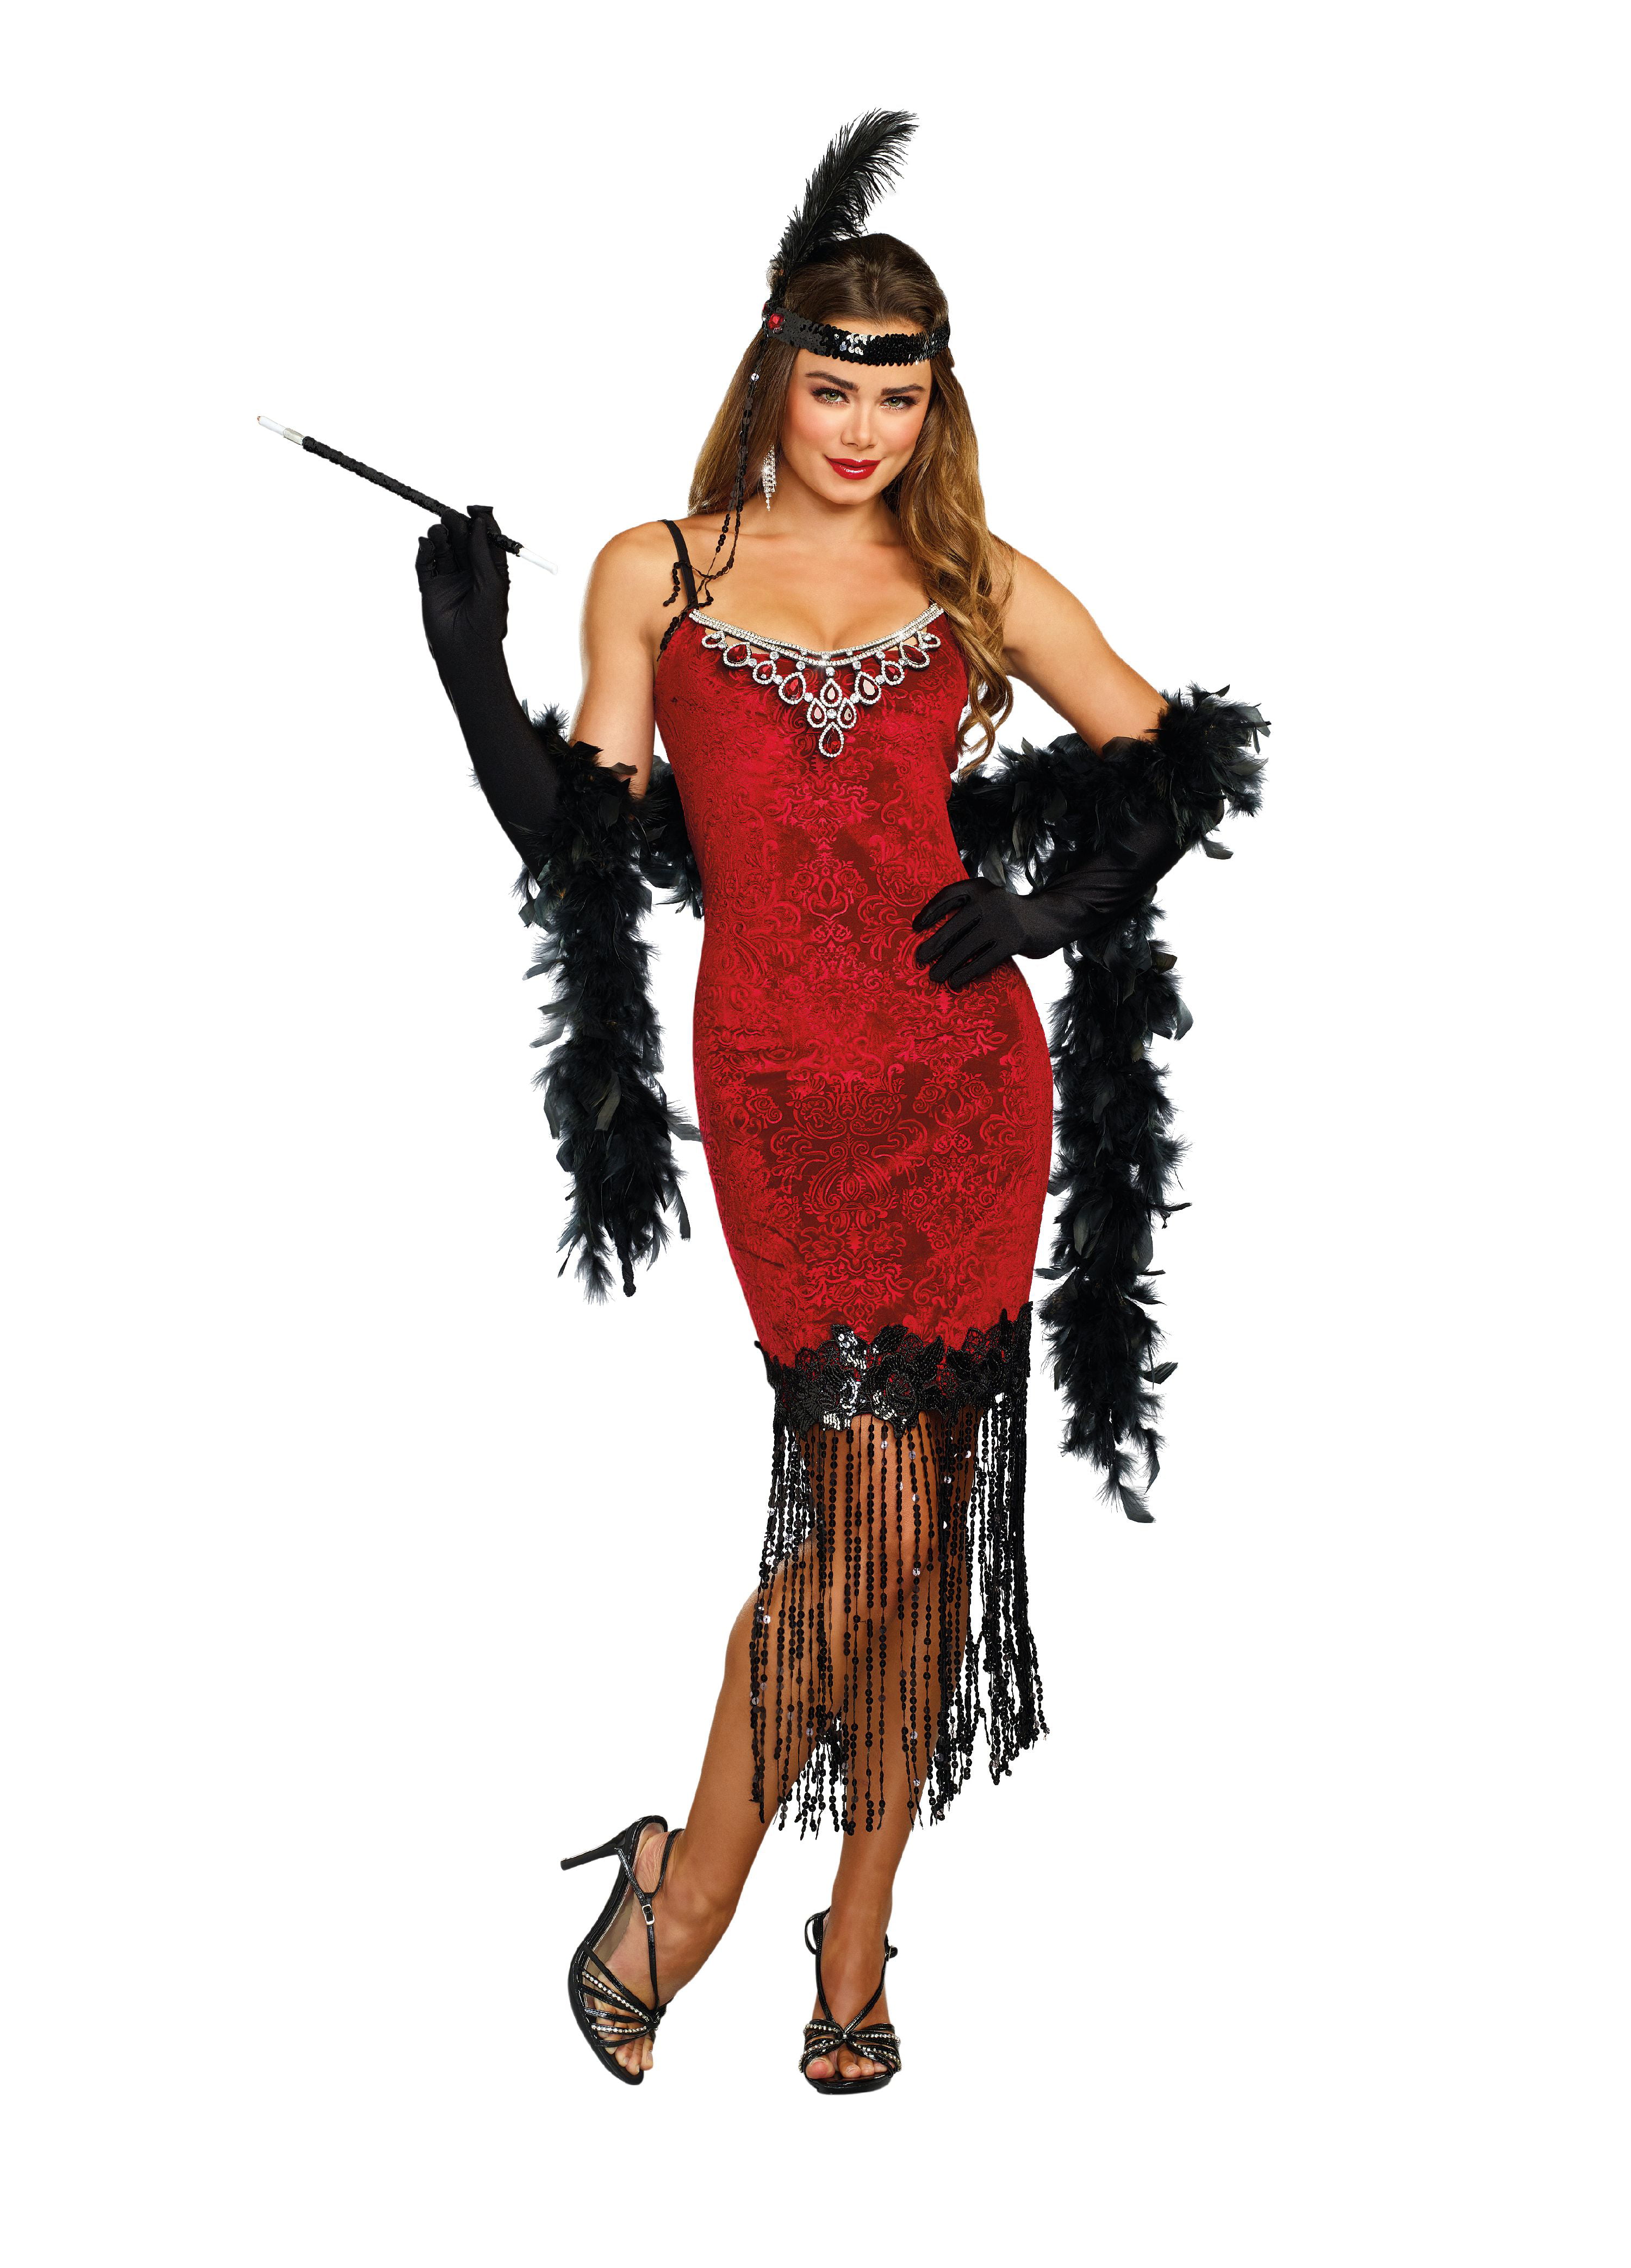 Size S M L XL Dreamgirl 7474 Ruby Red Hot Roaring 20's Flapper Costume 4 Pc 